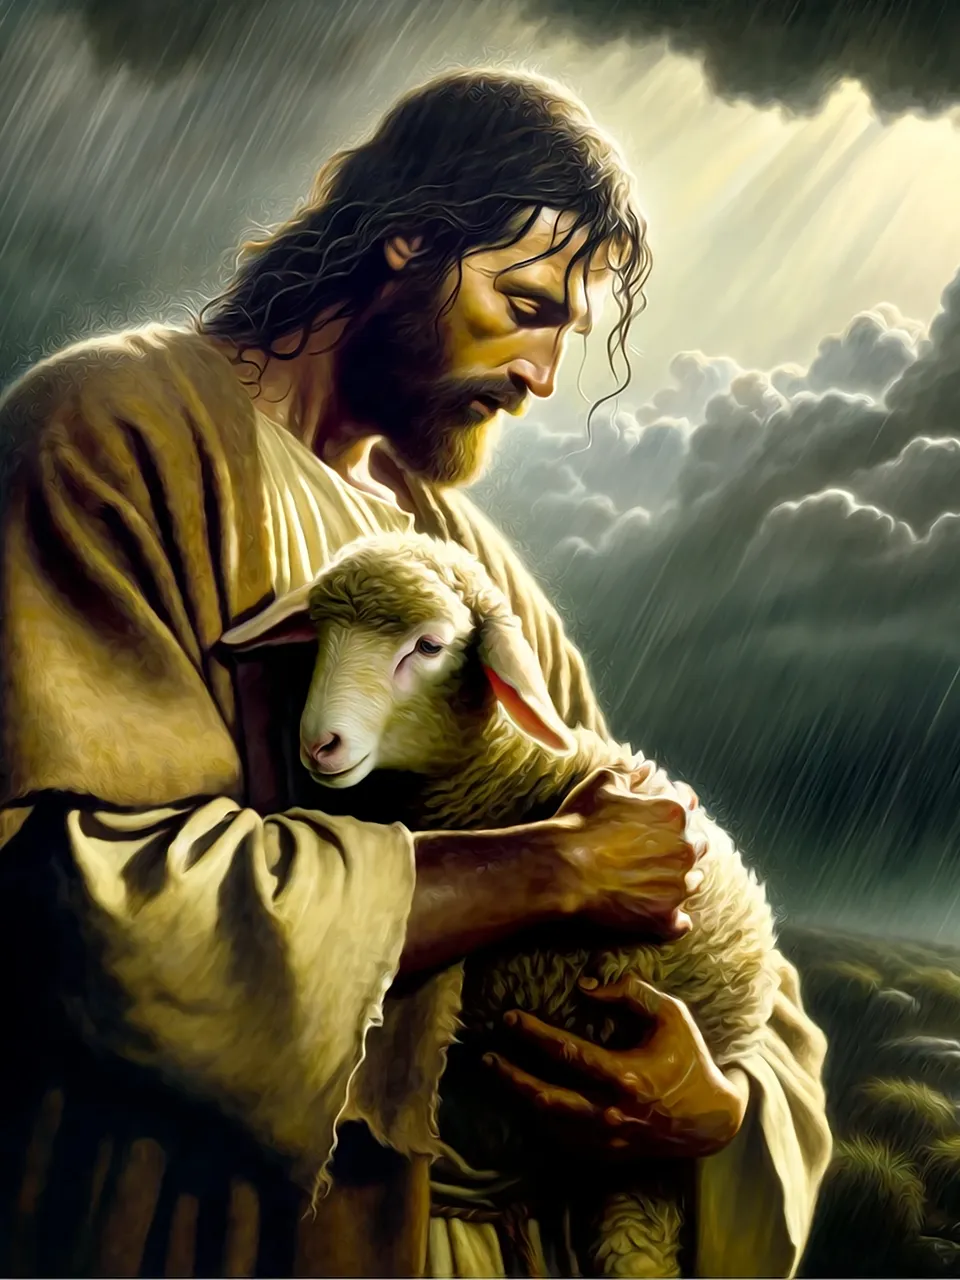 a painting of jesus holding a sheep in the rain